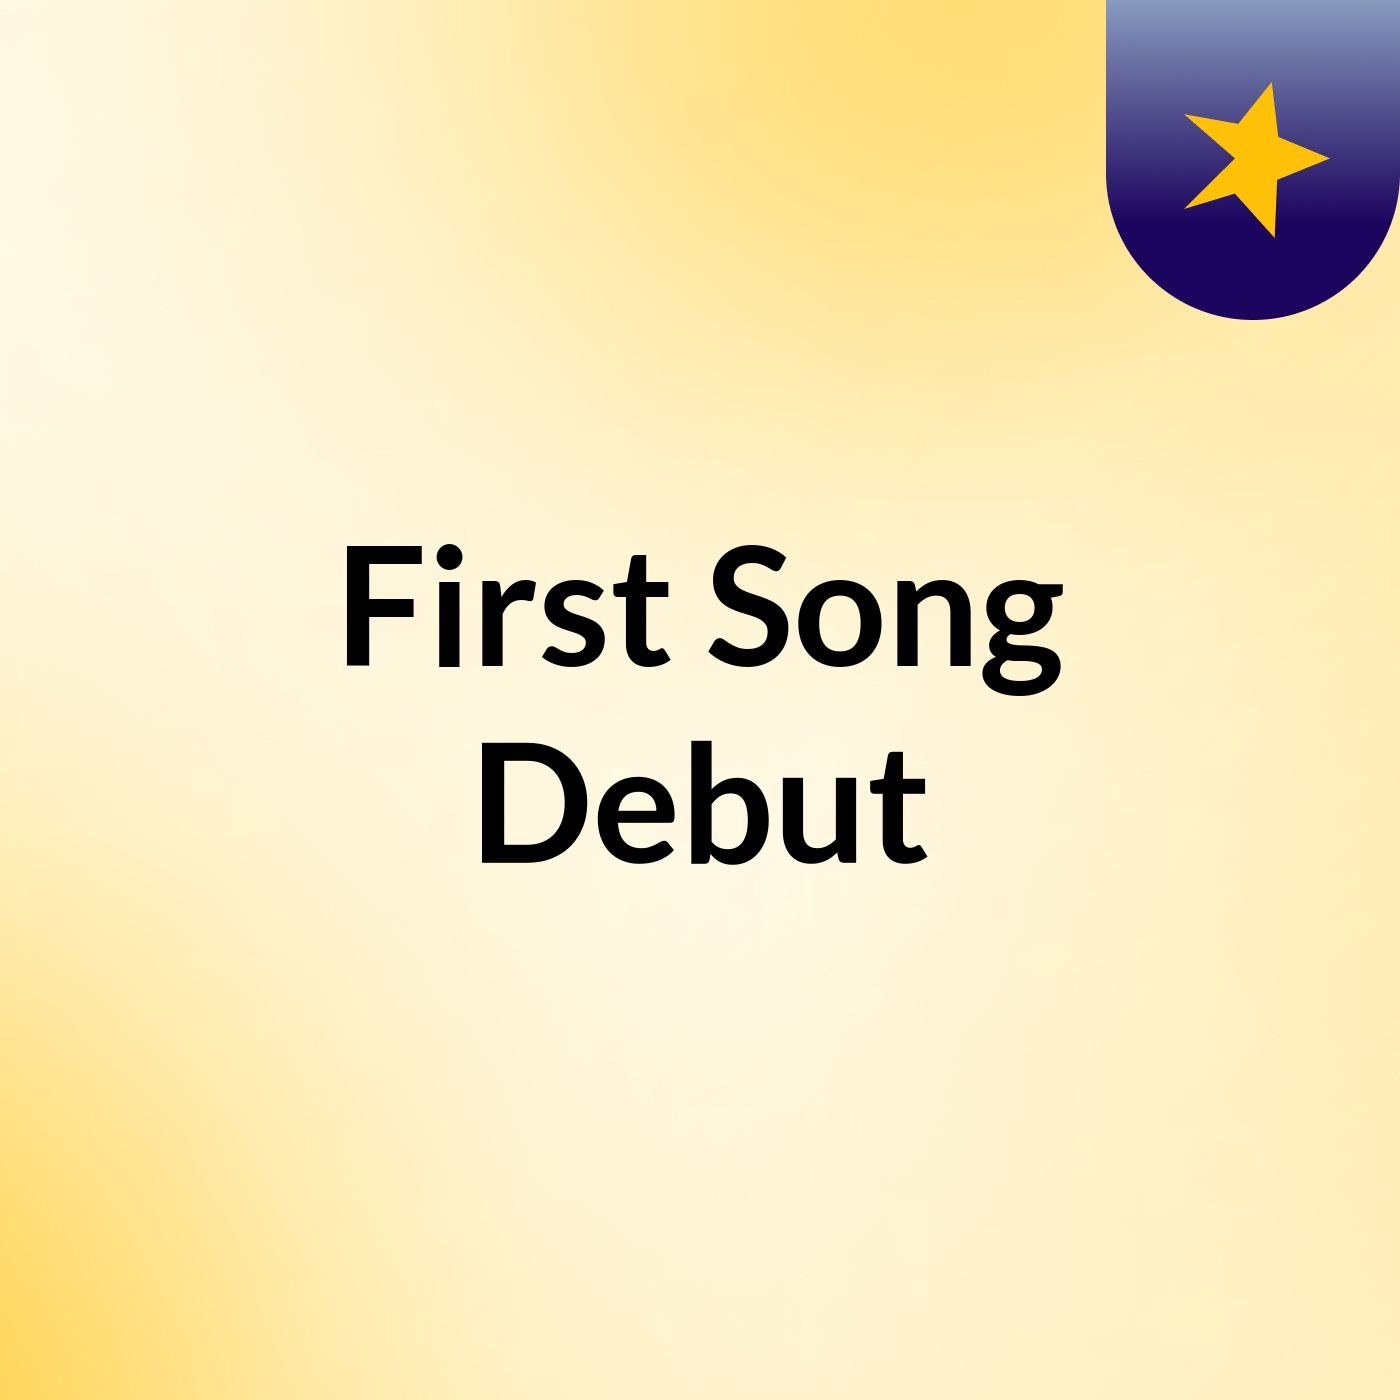 First Song Debut